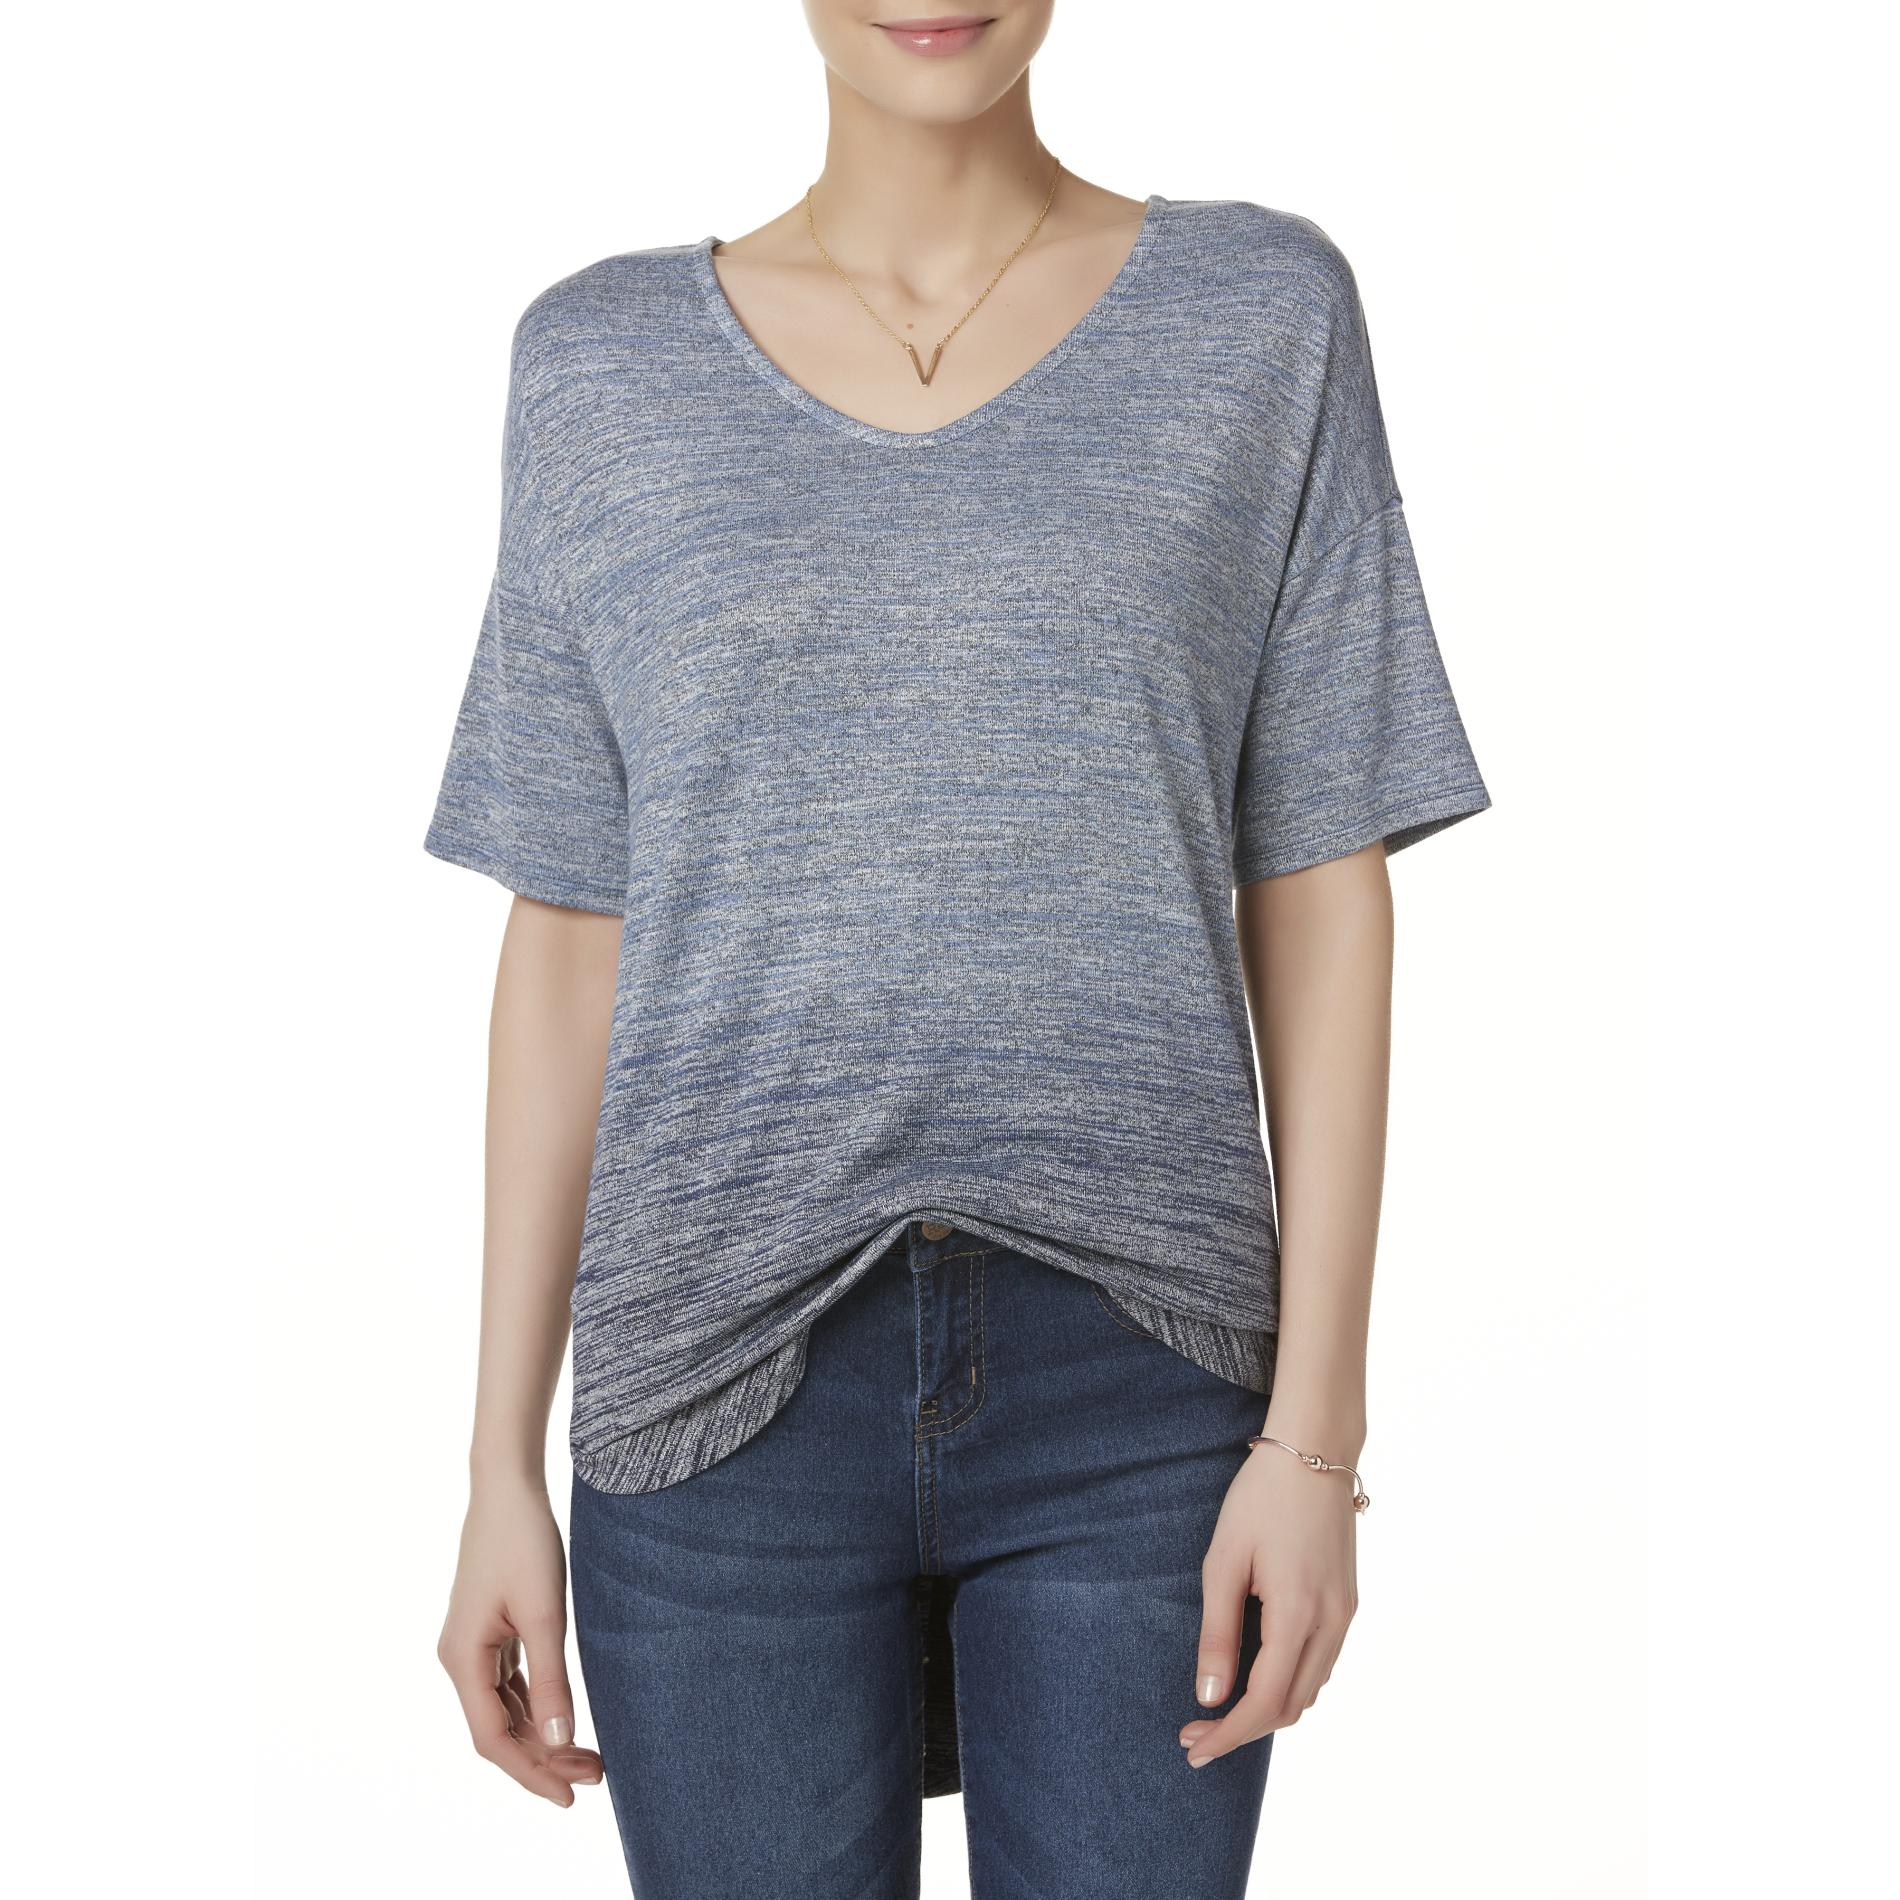 Simply Styled Women's V-Neck Top - Space Dyed